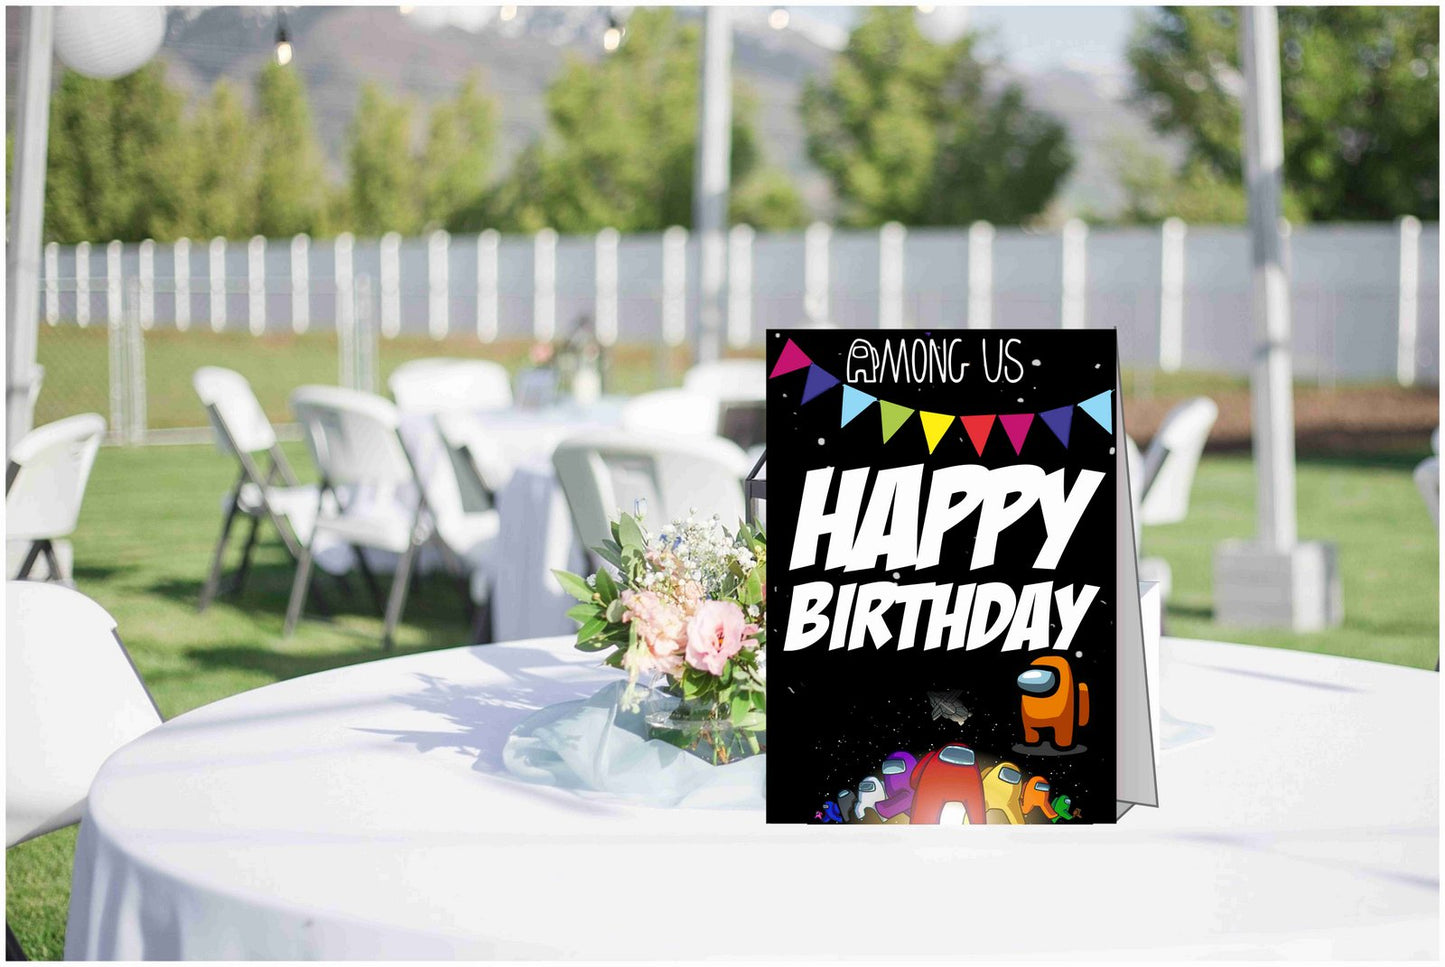 Among Us Theme Cake Table and Guest Table Birthday Decoration Centerpiece Pack of 2